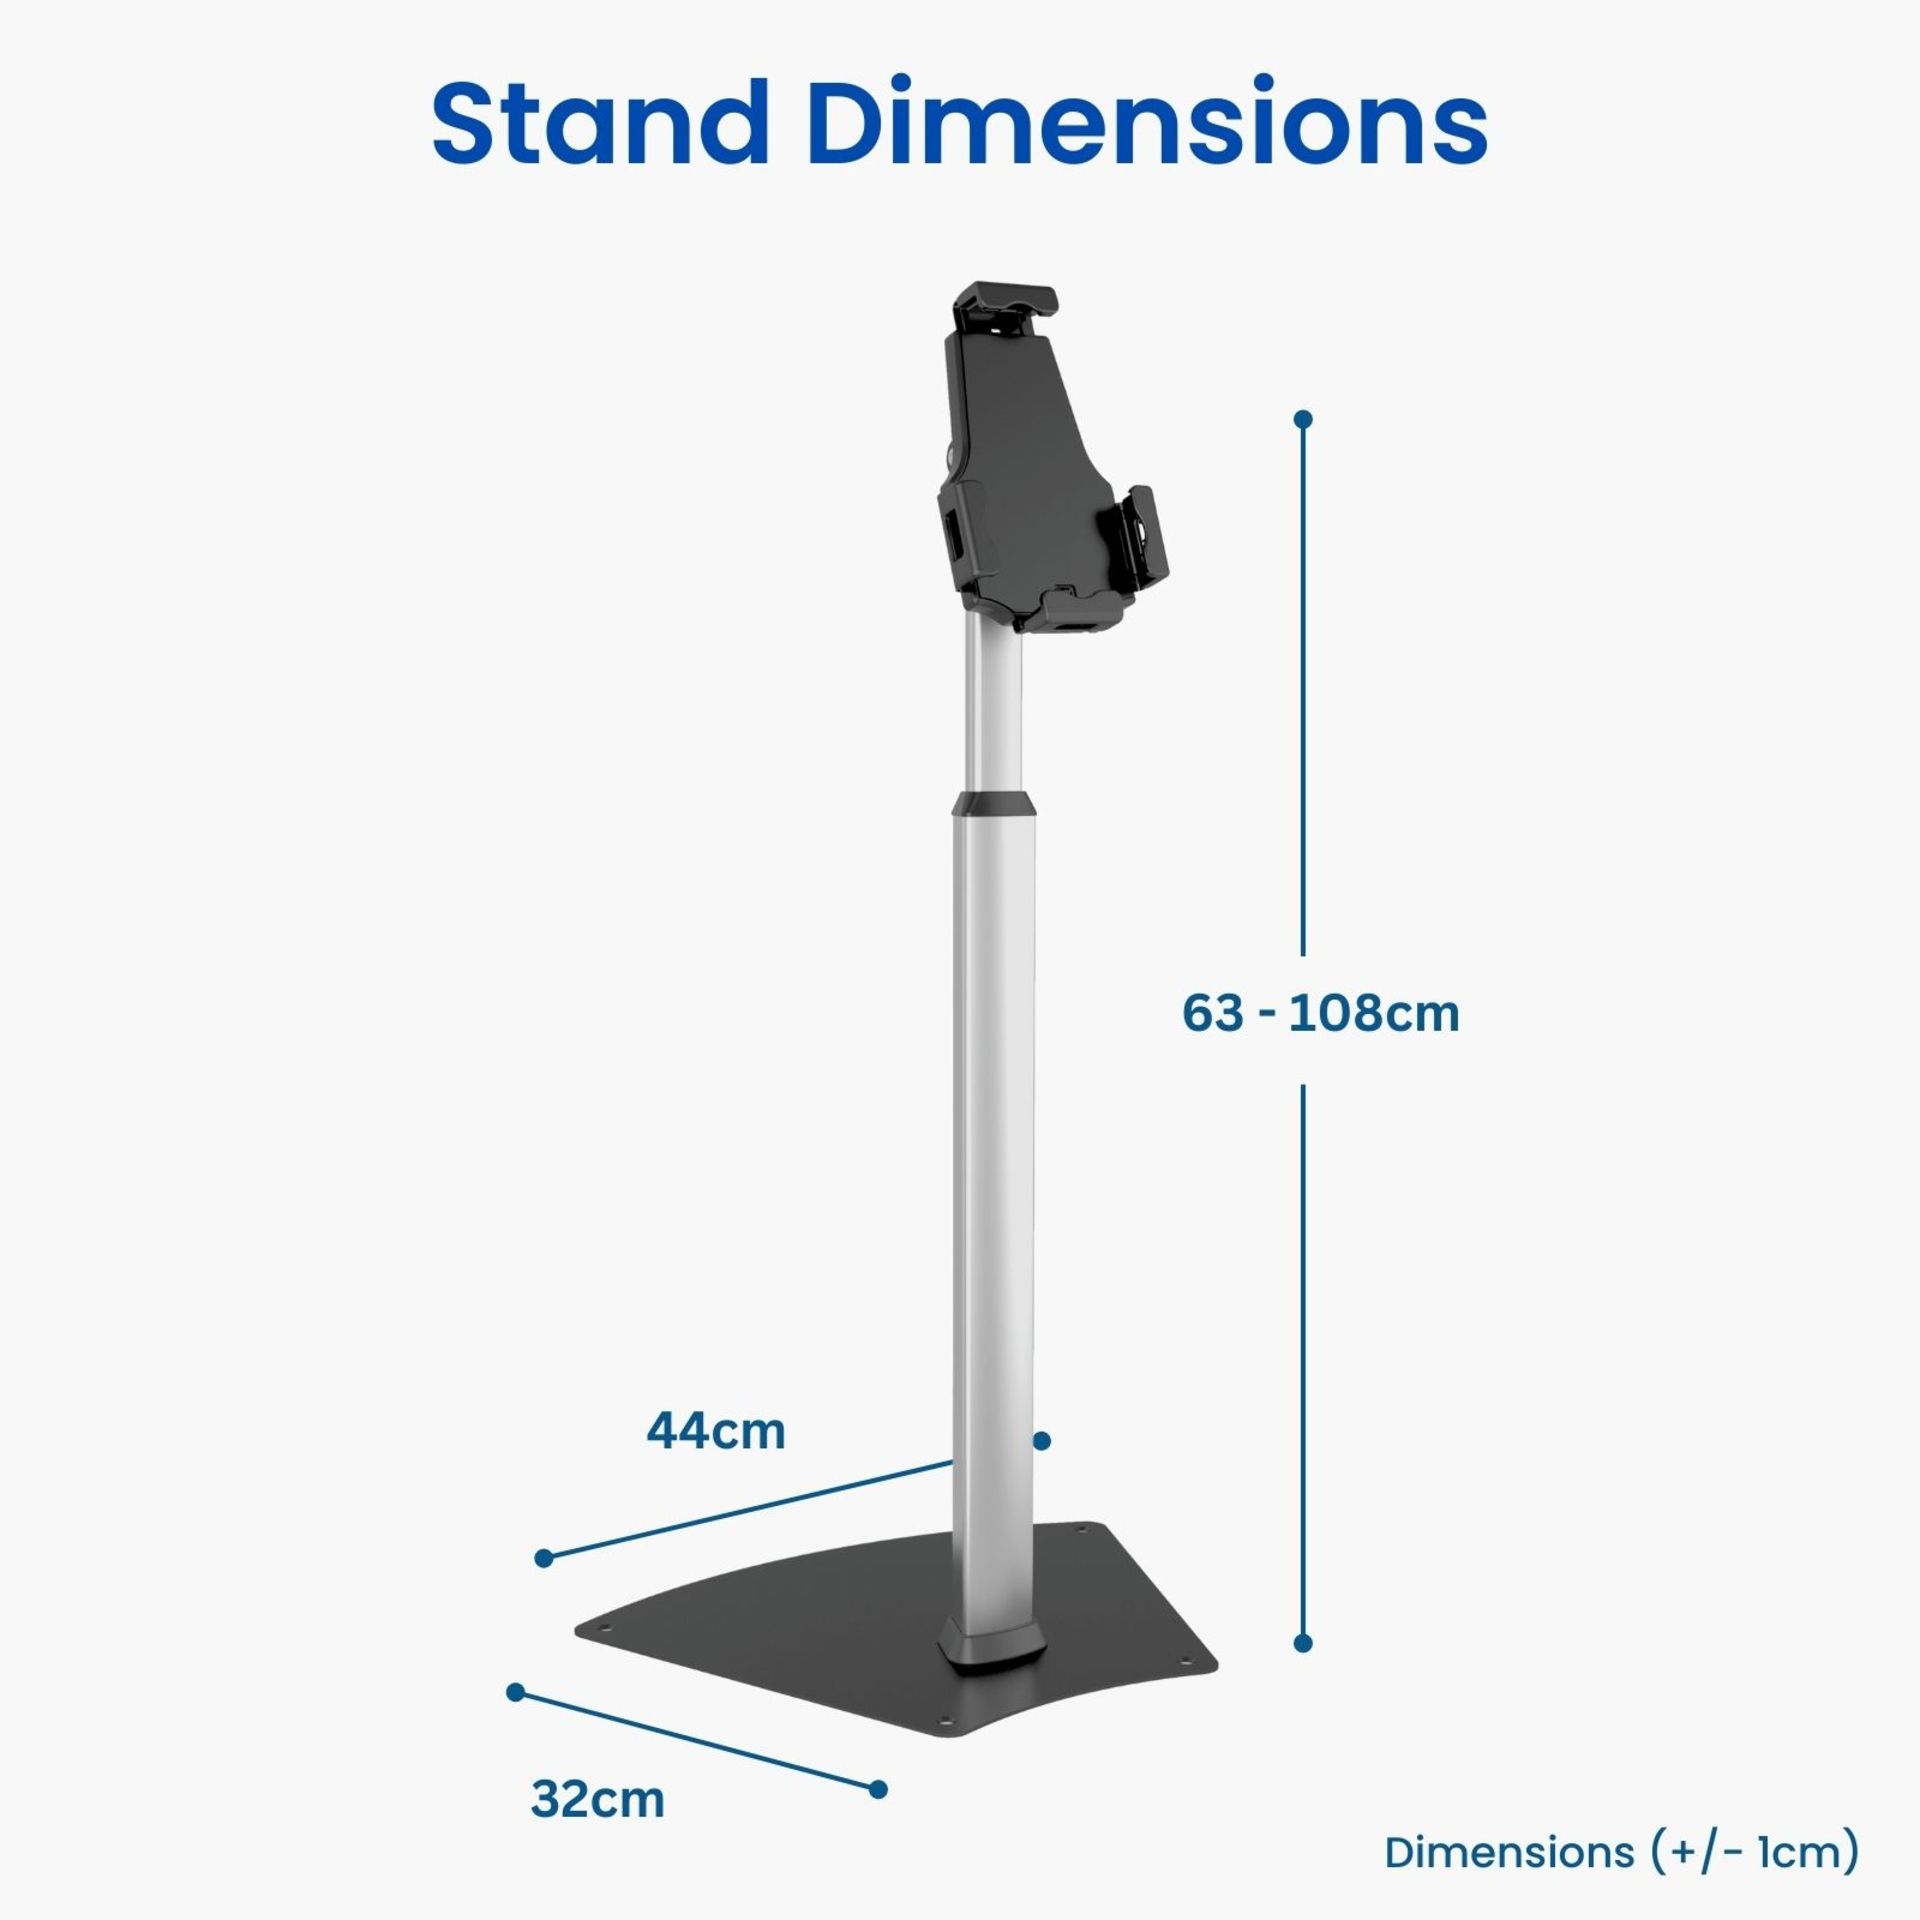 150 X FLOOR DISPLAY STANDS FOR IPADS & TABLETS, ANTI-THEFT, ADJUSTABLE HEIGHT. RRP £18,000 - Image 7 of 7